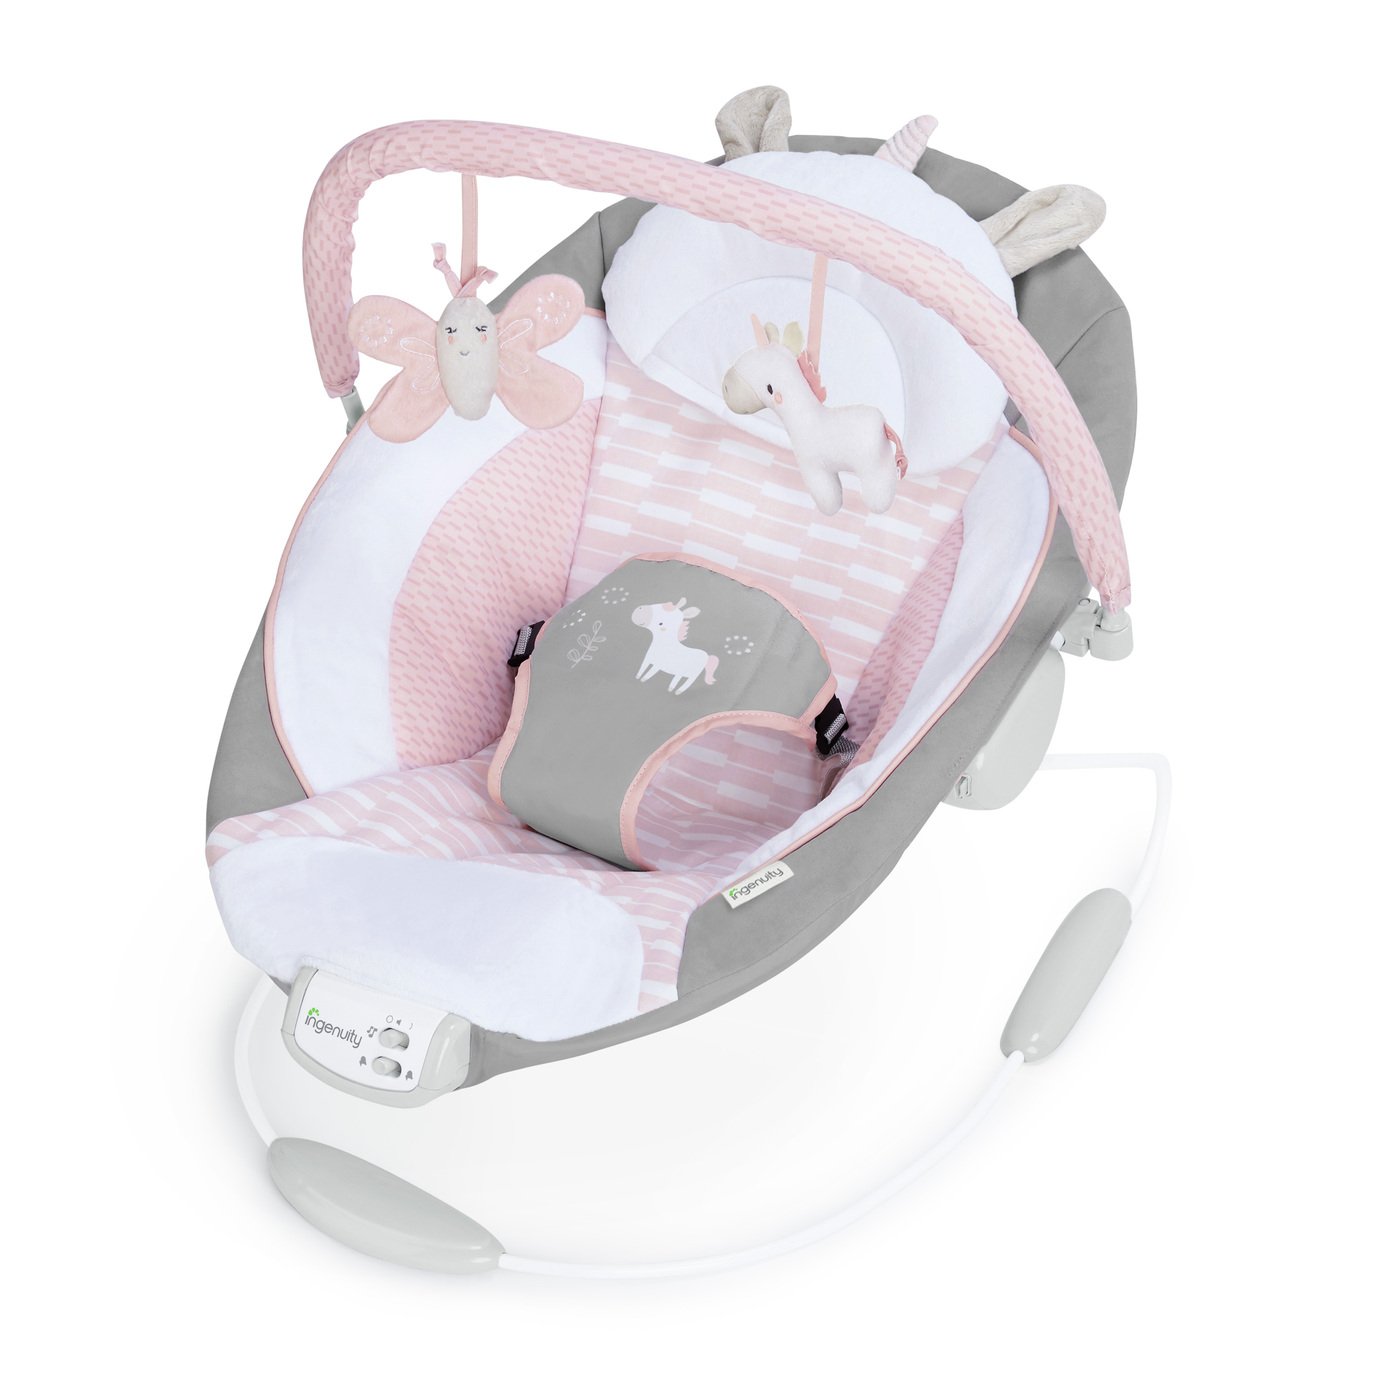 adult sized baby bouncer